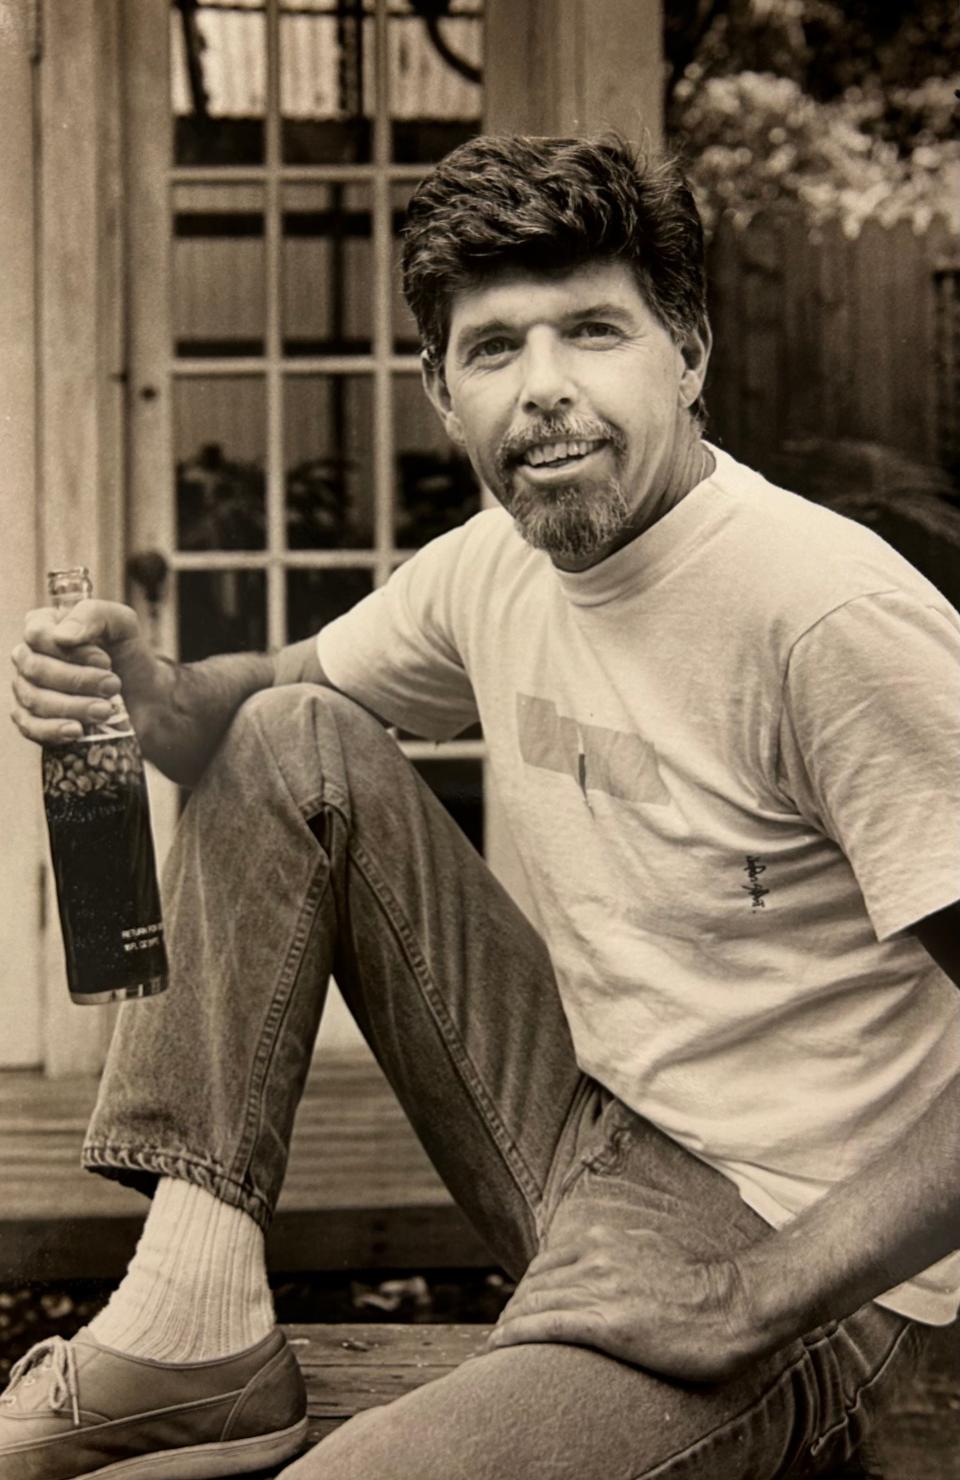 Palm Valley native Ernest Matthew Mickler's cookbook, "White Trash Cooking," became a sensation in the 1980s. Here he is pictured in 1986.